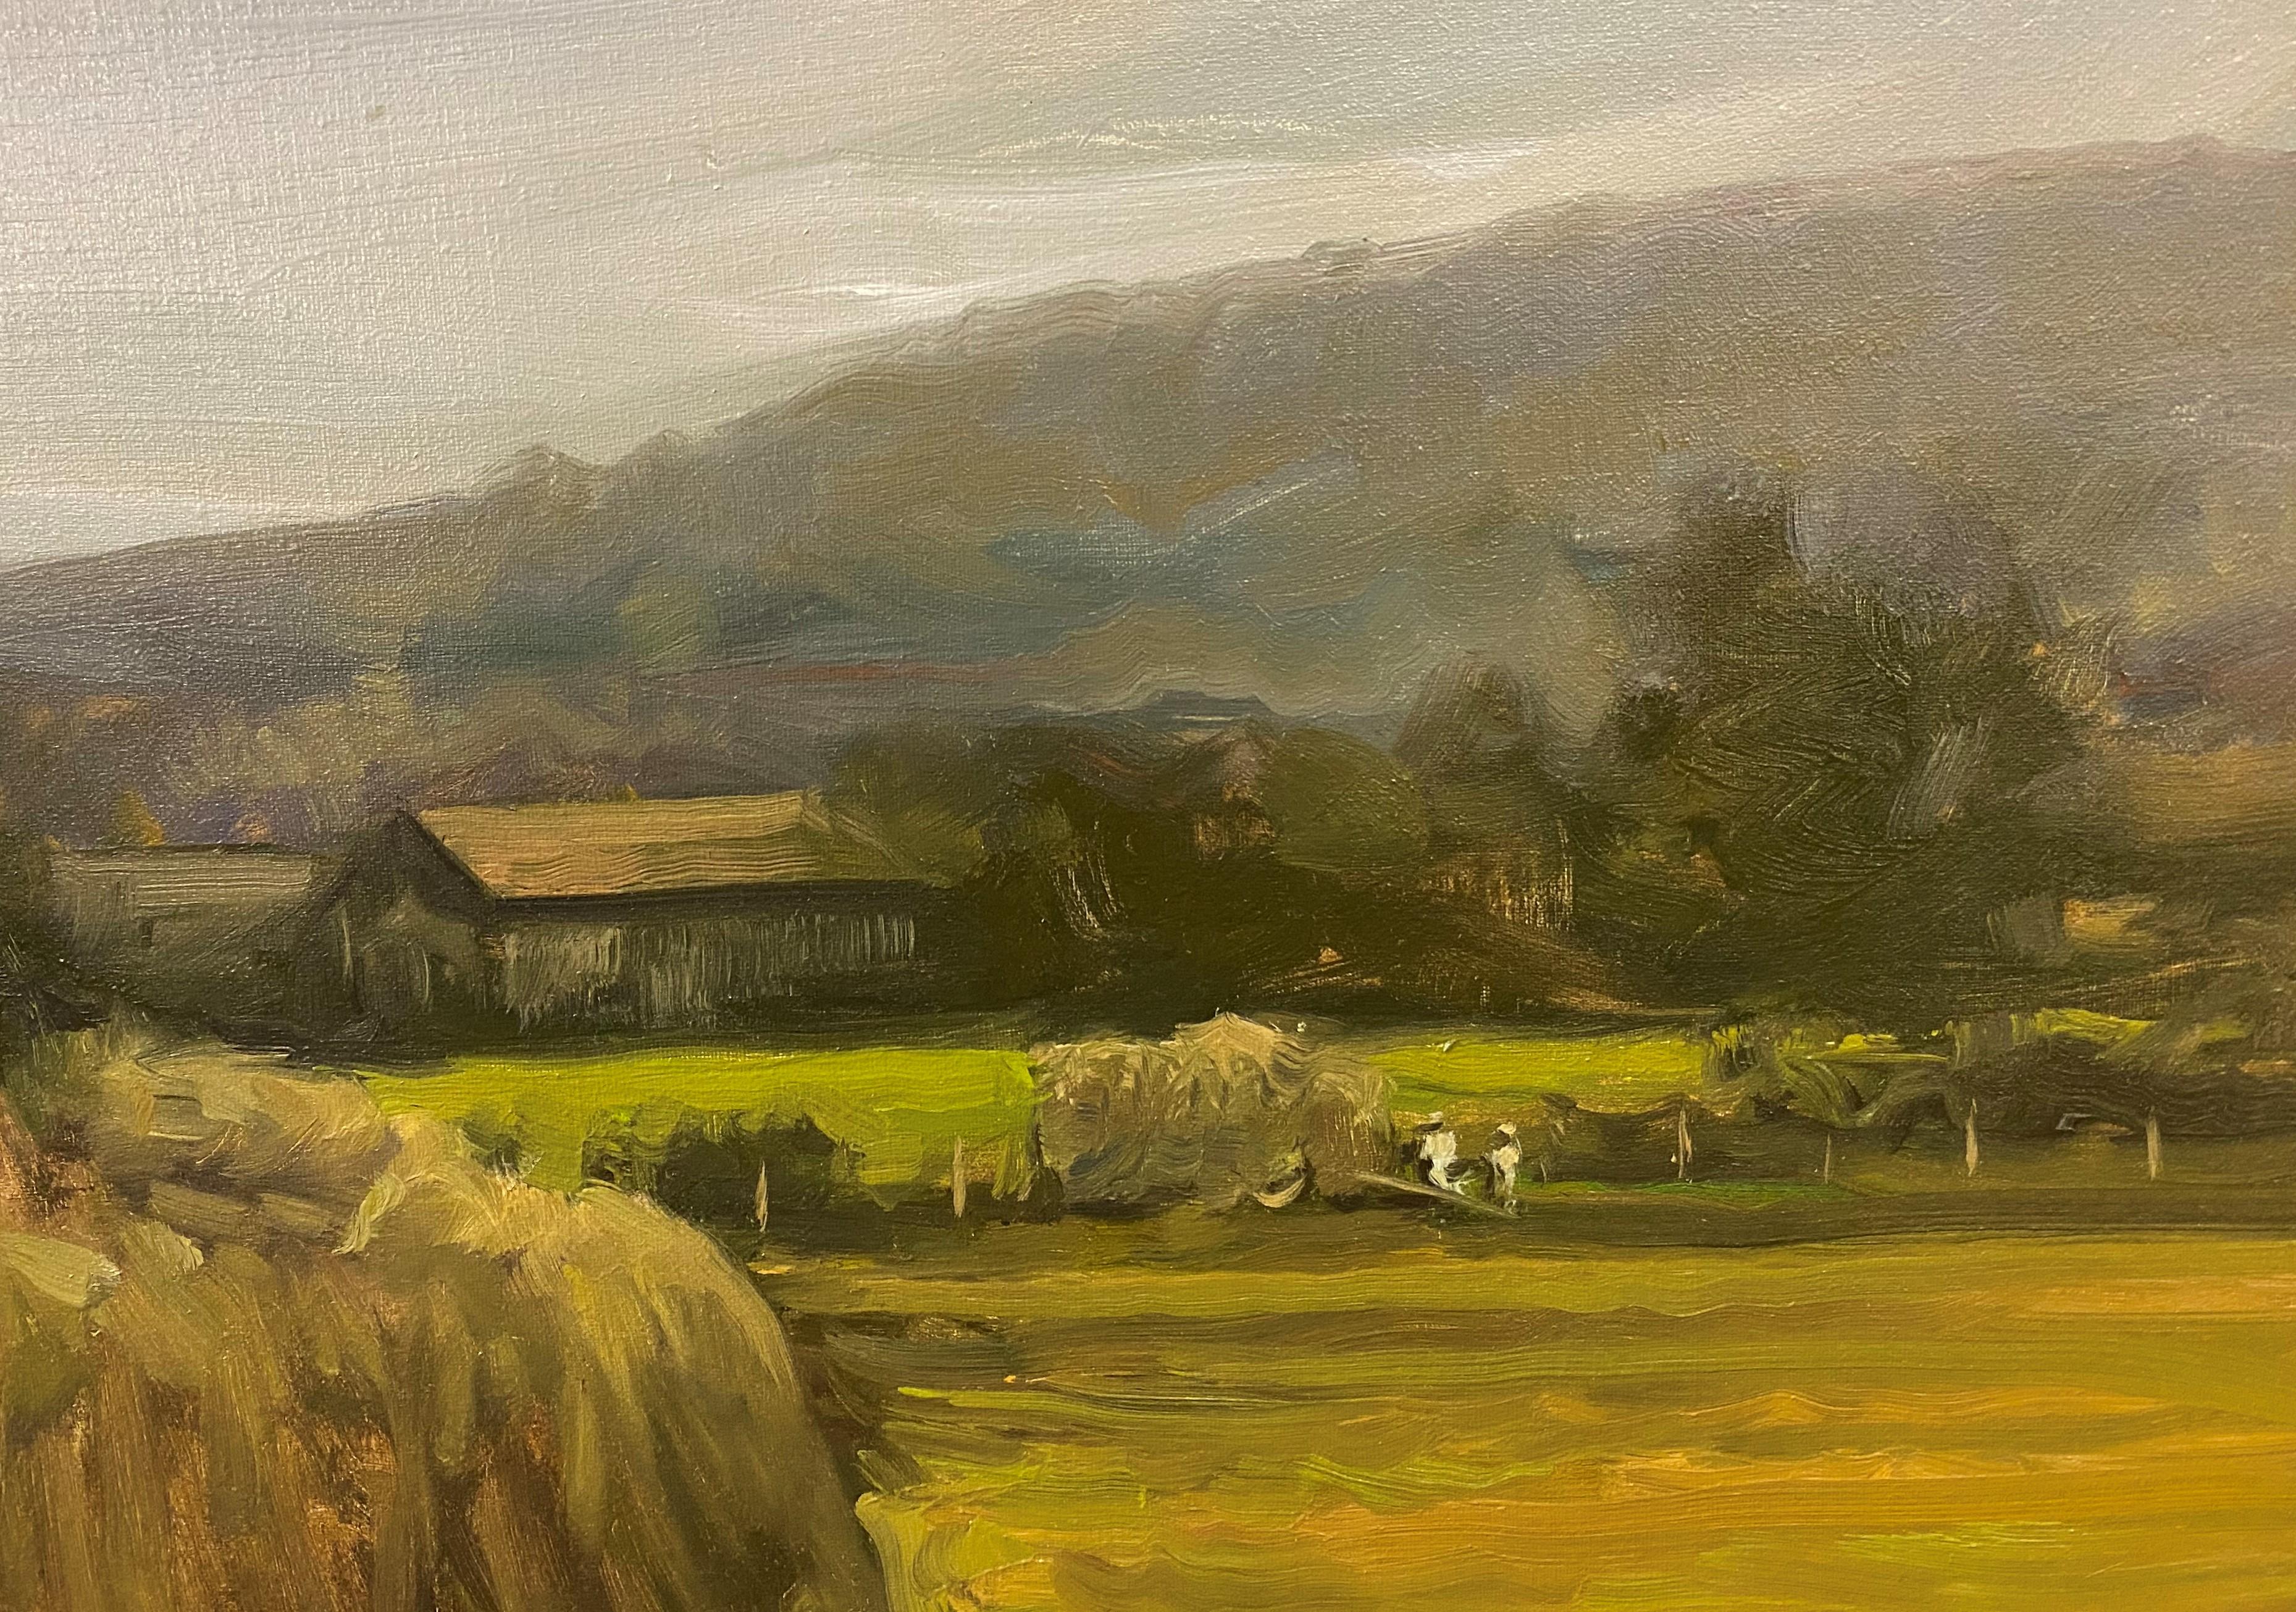 Harvest, Approaching Storm - Tonalist Painting by Dennis Sheehan